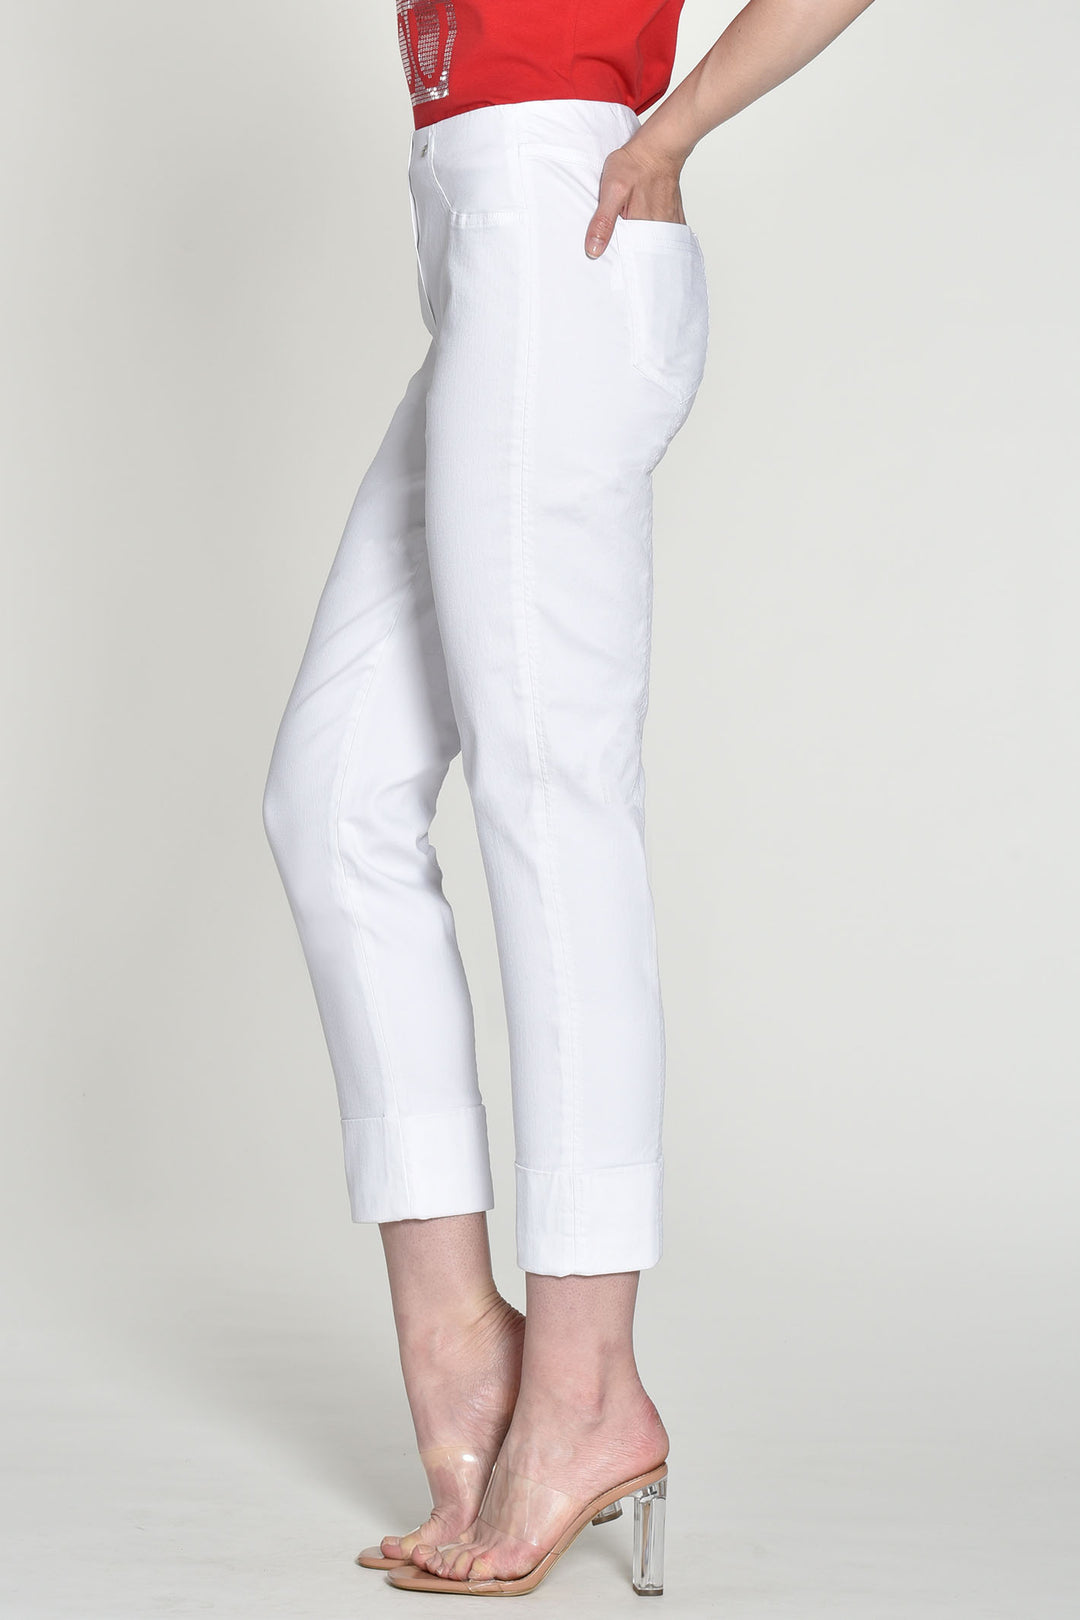 Robell 51628 5448 10 Bella 09 White Trousers 68cm - Experience Boutique